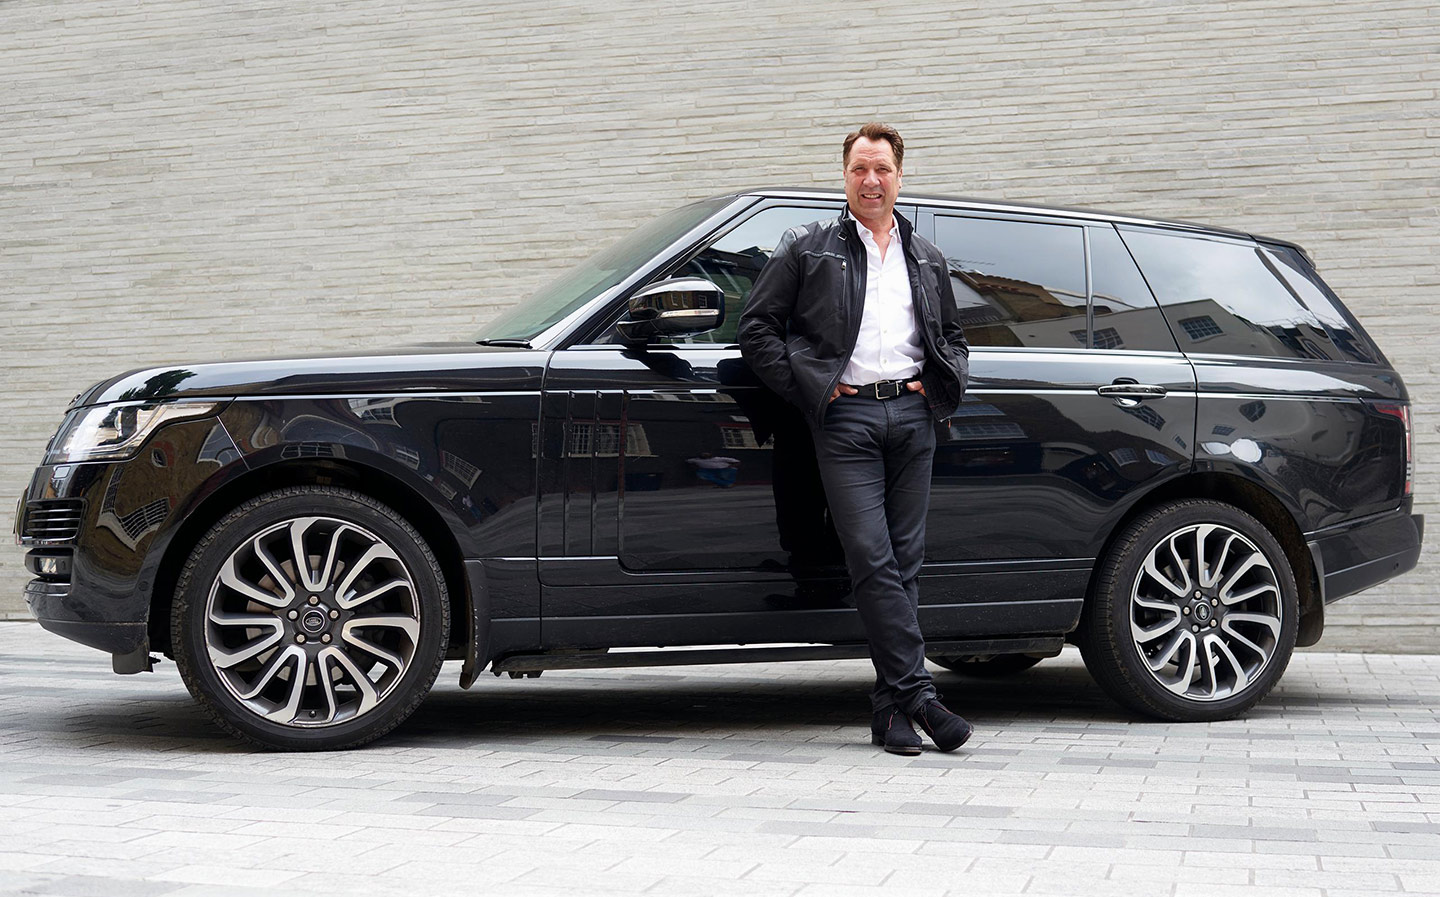 Me and My Motor: The cars and career of David Seaman, former Arsenal and England goalkeeper. Sunday Times interview